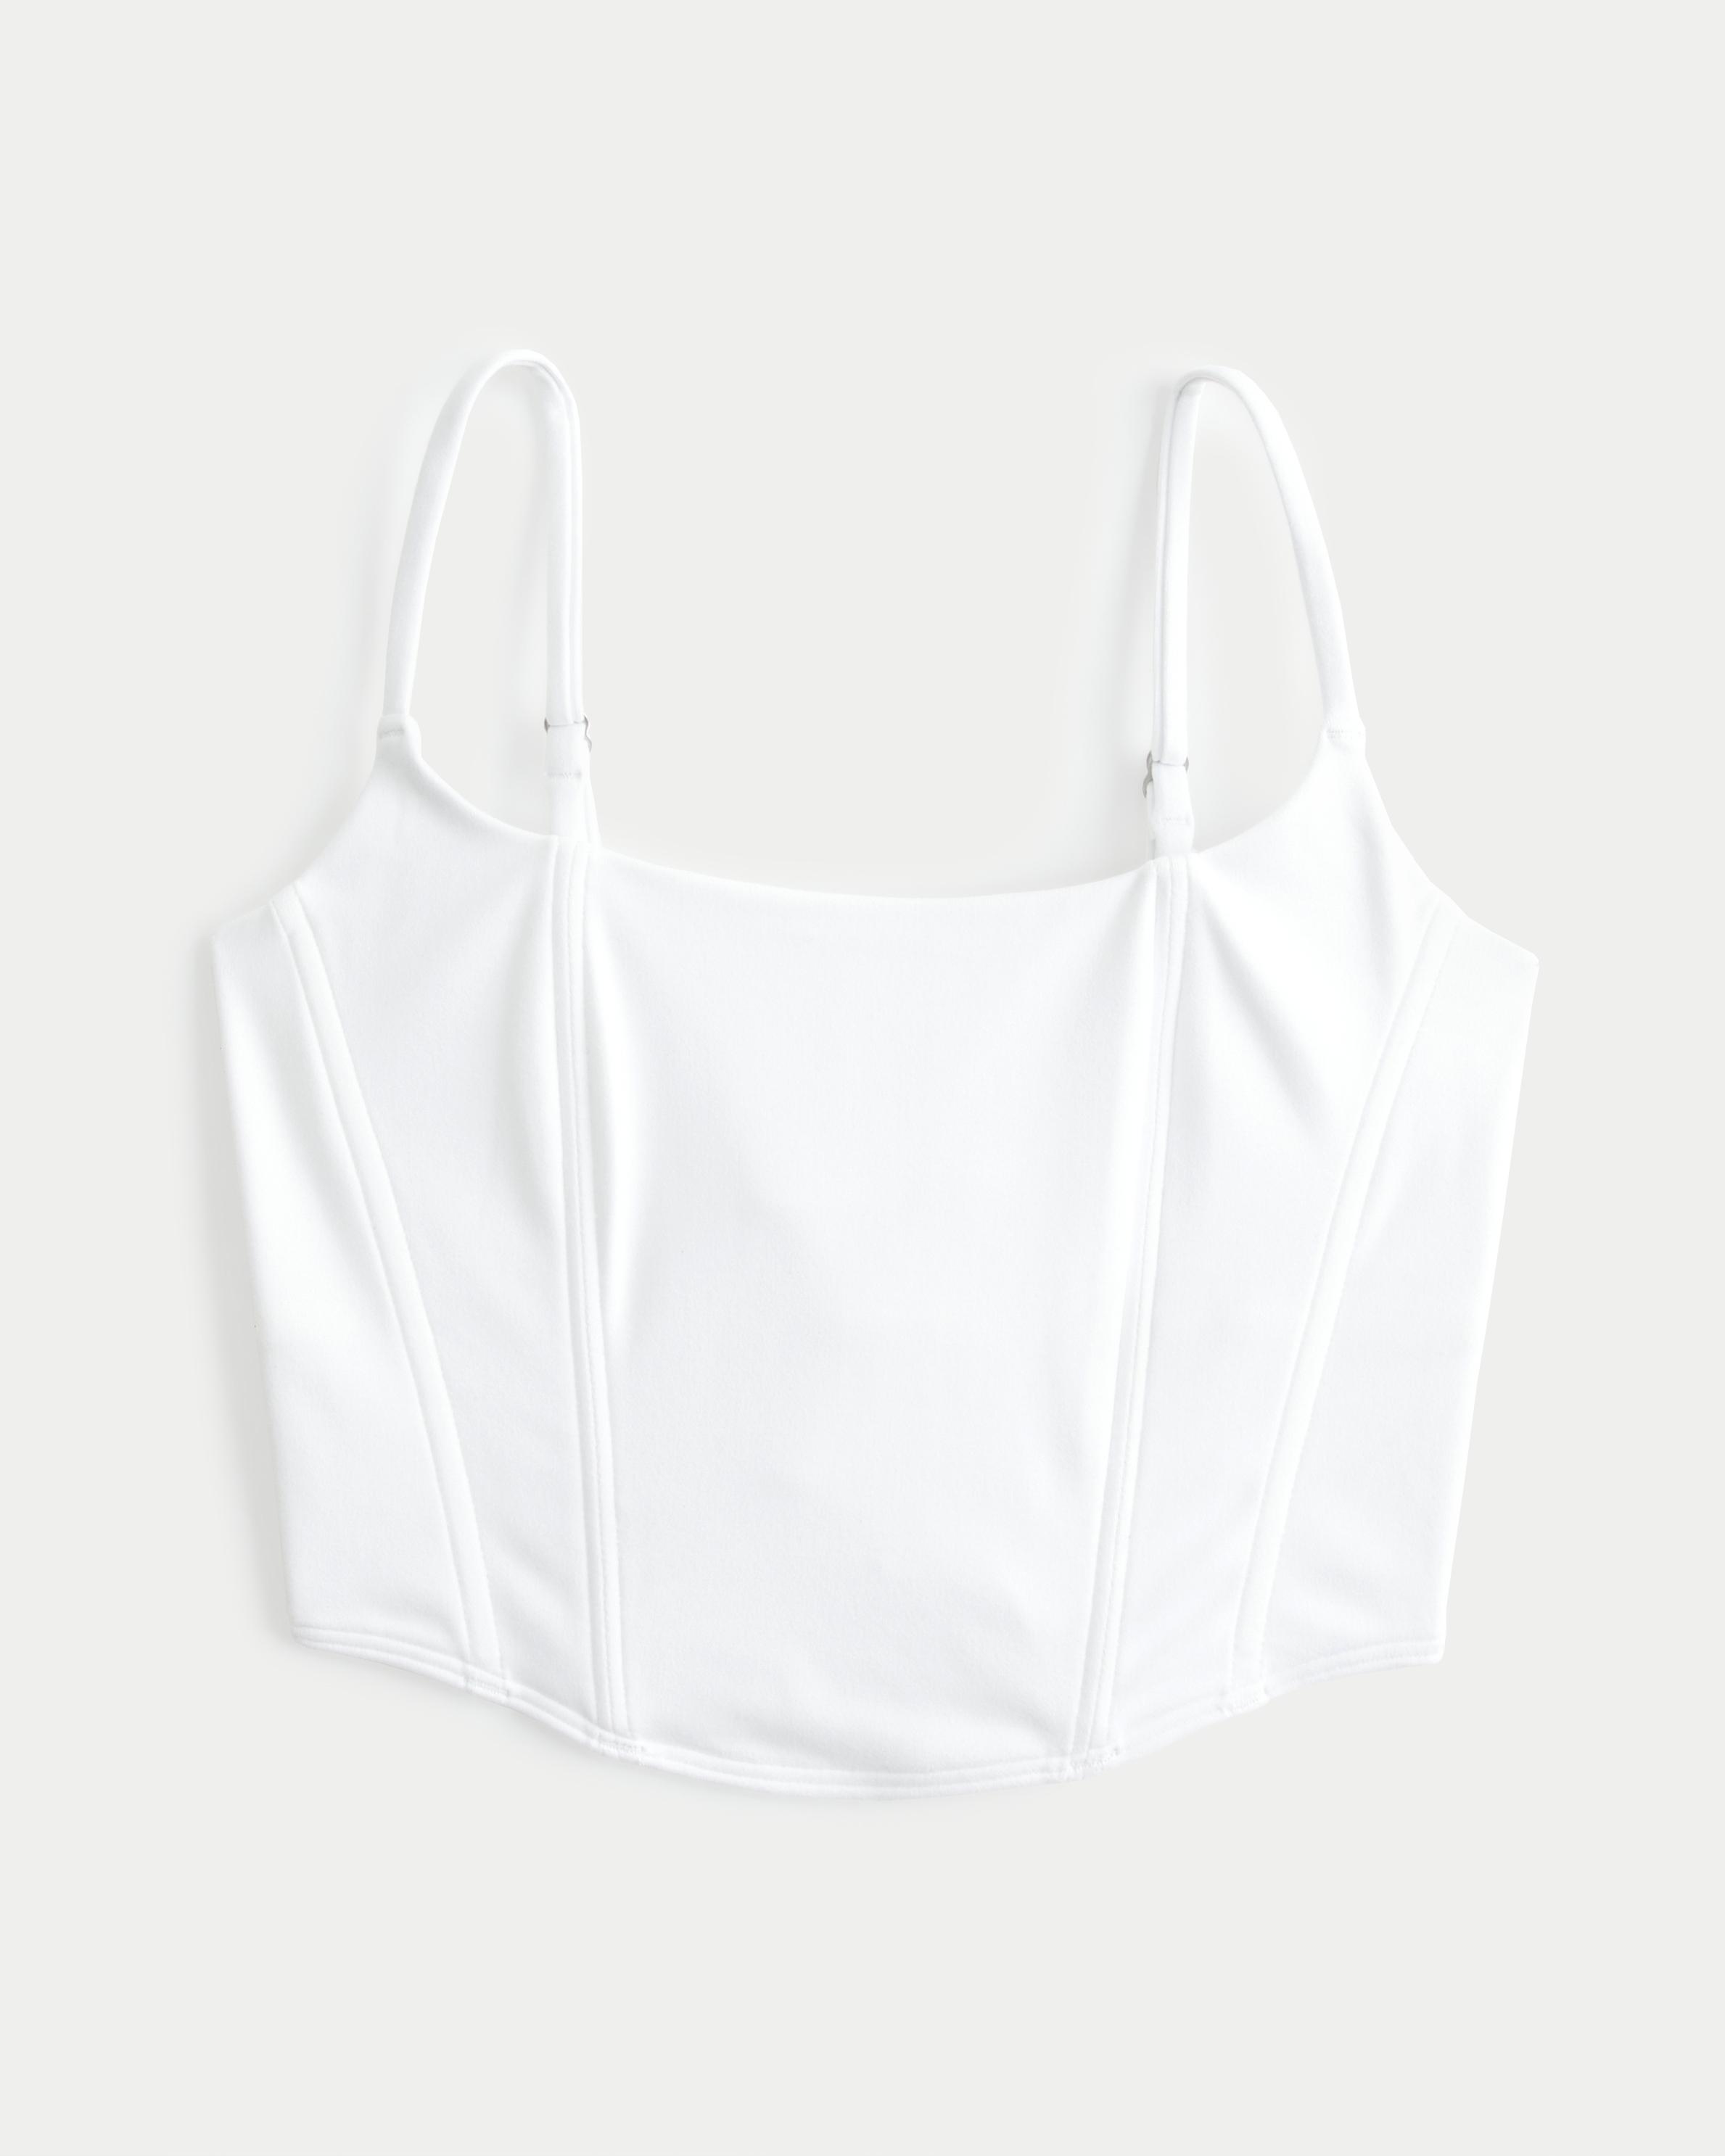 Hollister Gilly Hicks Recharge Lace-up Back Corset in White